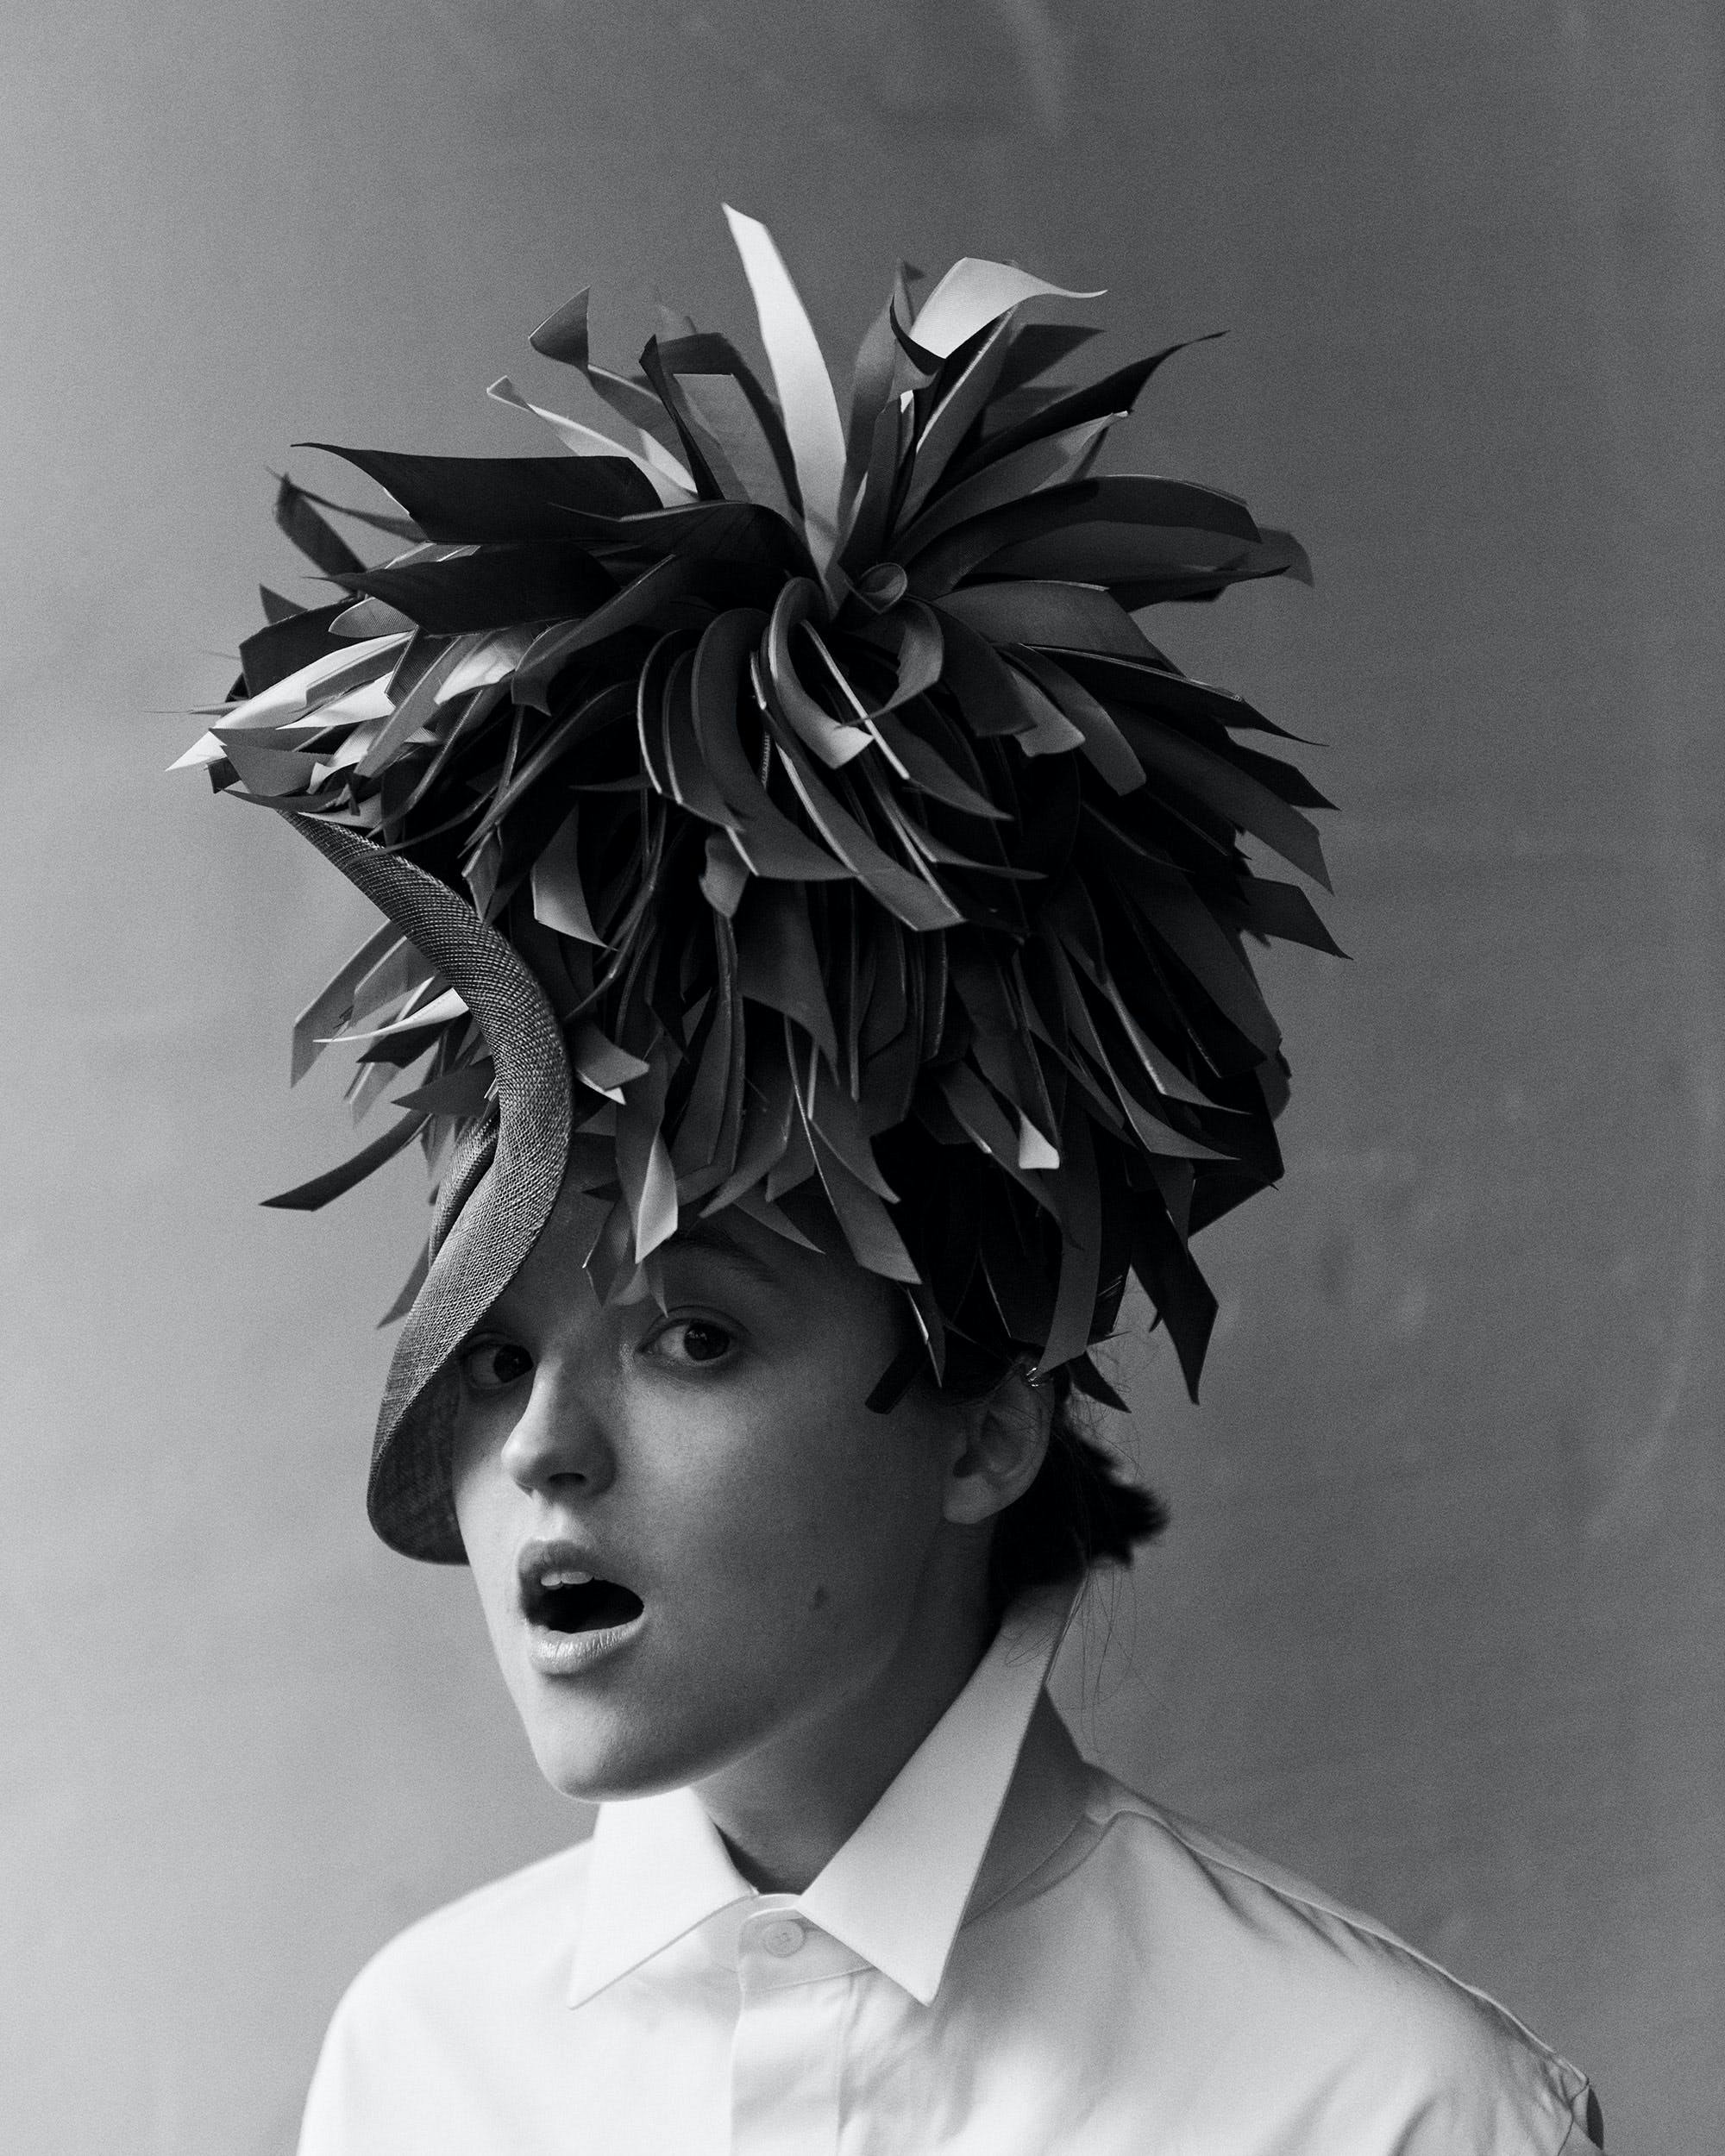 Bella Ramsey wearing a sculptural hat in an editorial for L'OFFICIEL.